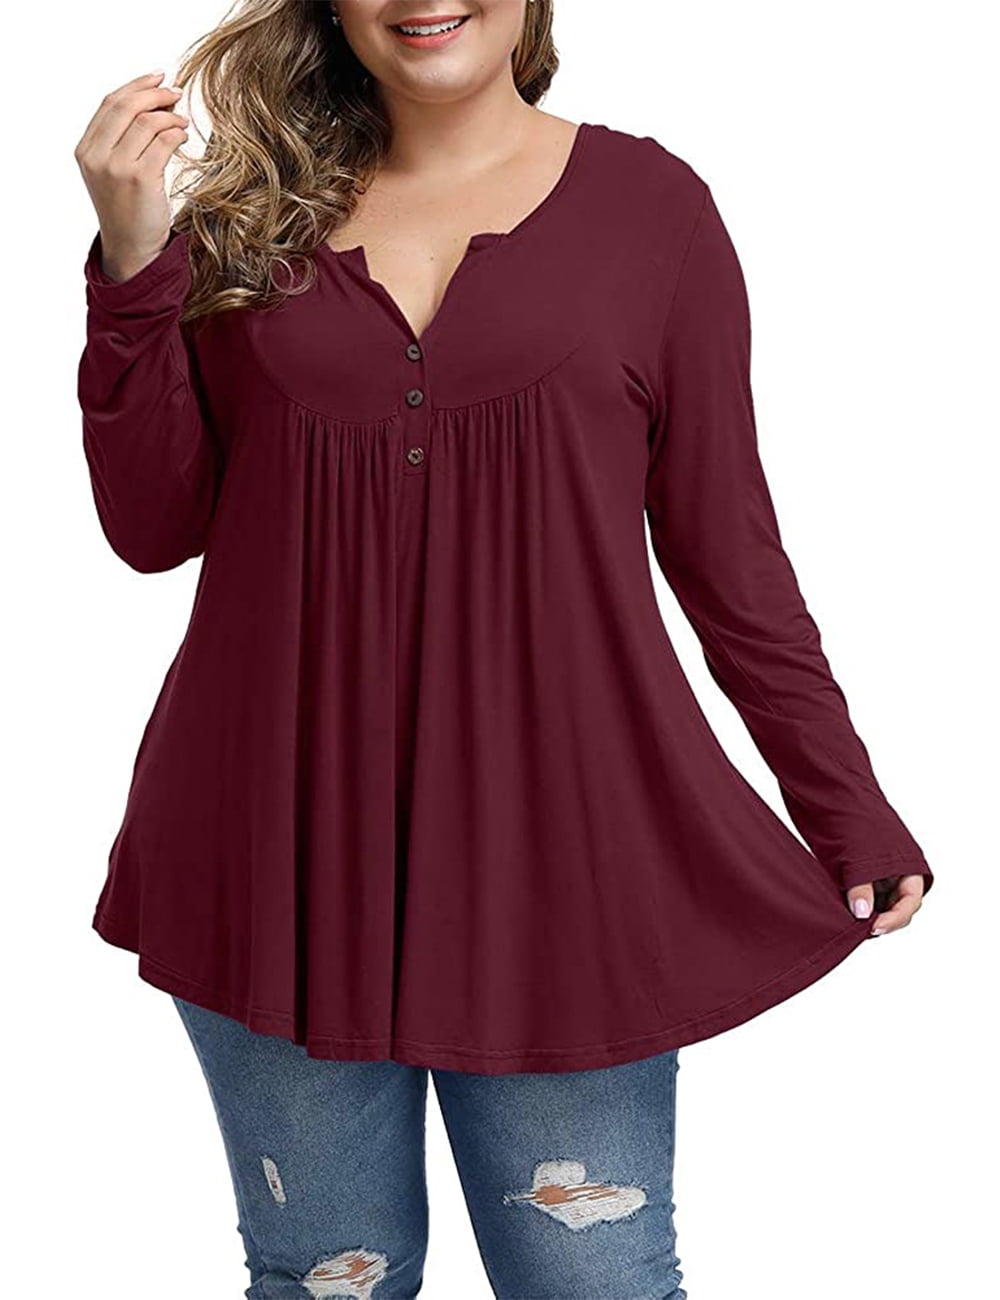 PLMOKEN Plus Size Top for Women Henley V Neck Shirts Short Sleeve Buttons Up Pleated Tunic Tops XL-4XL